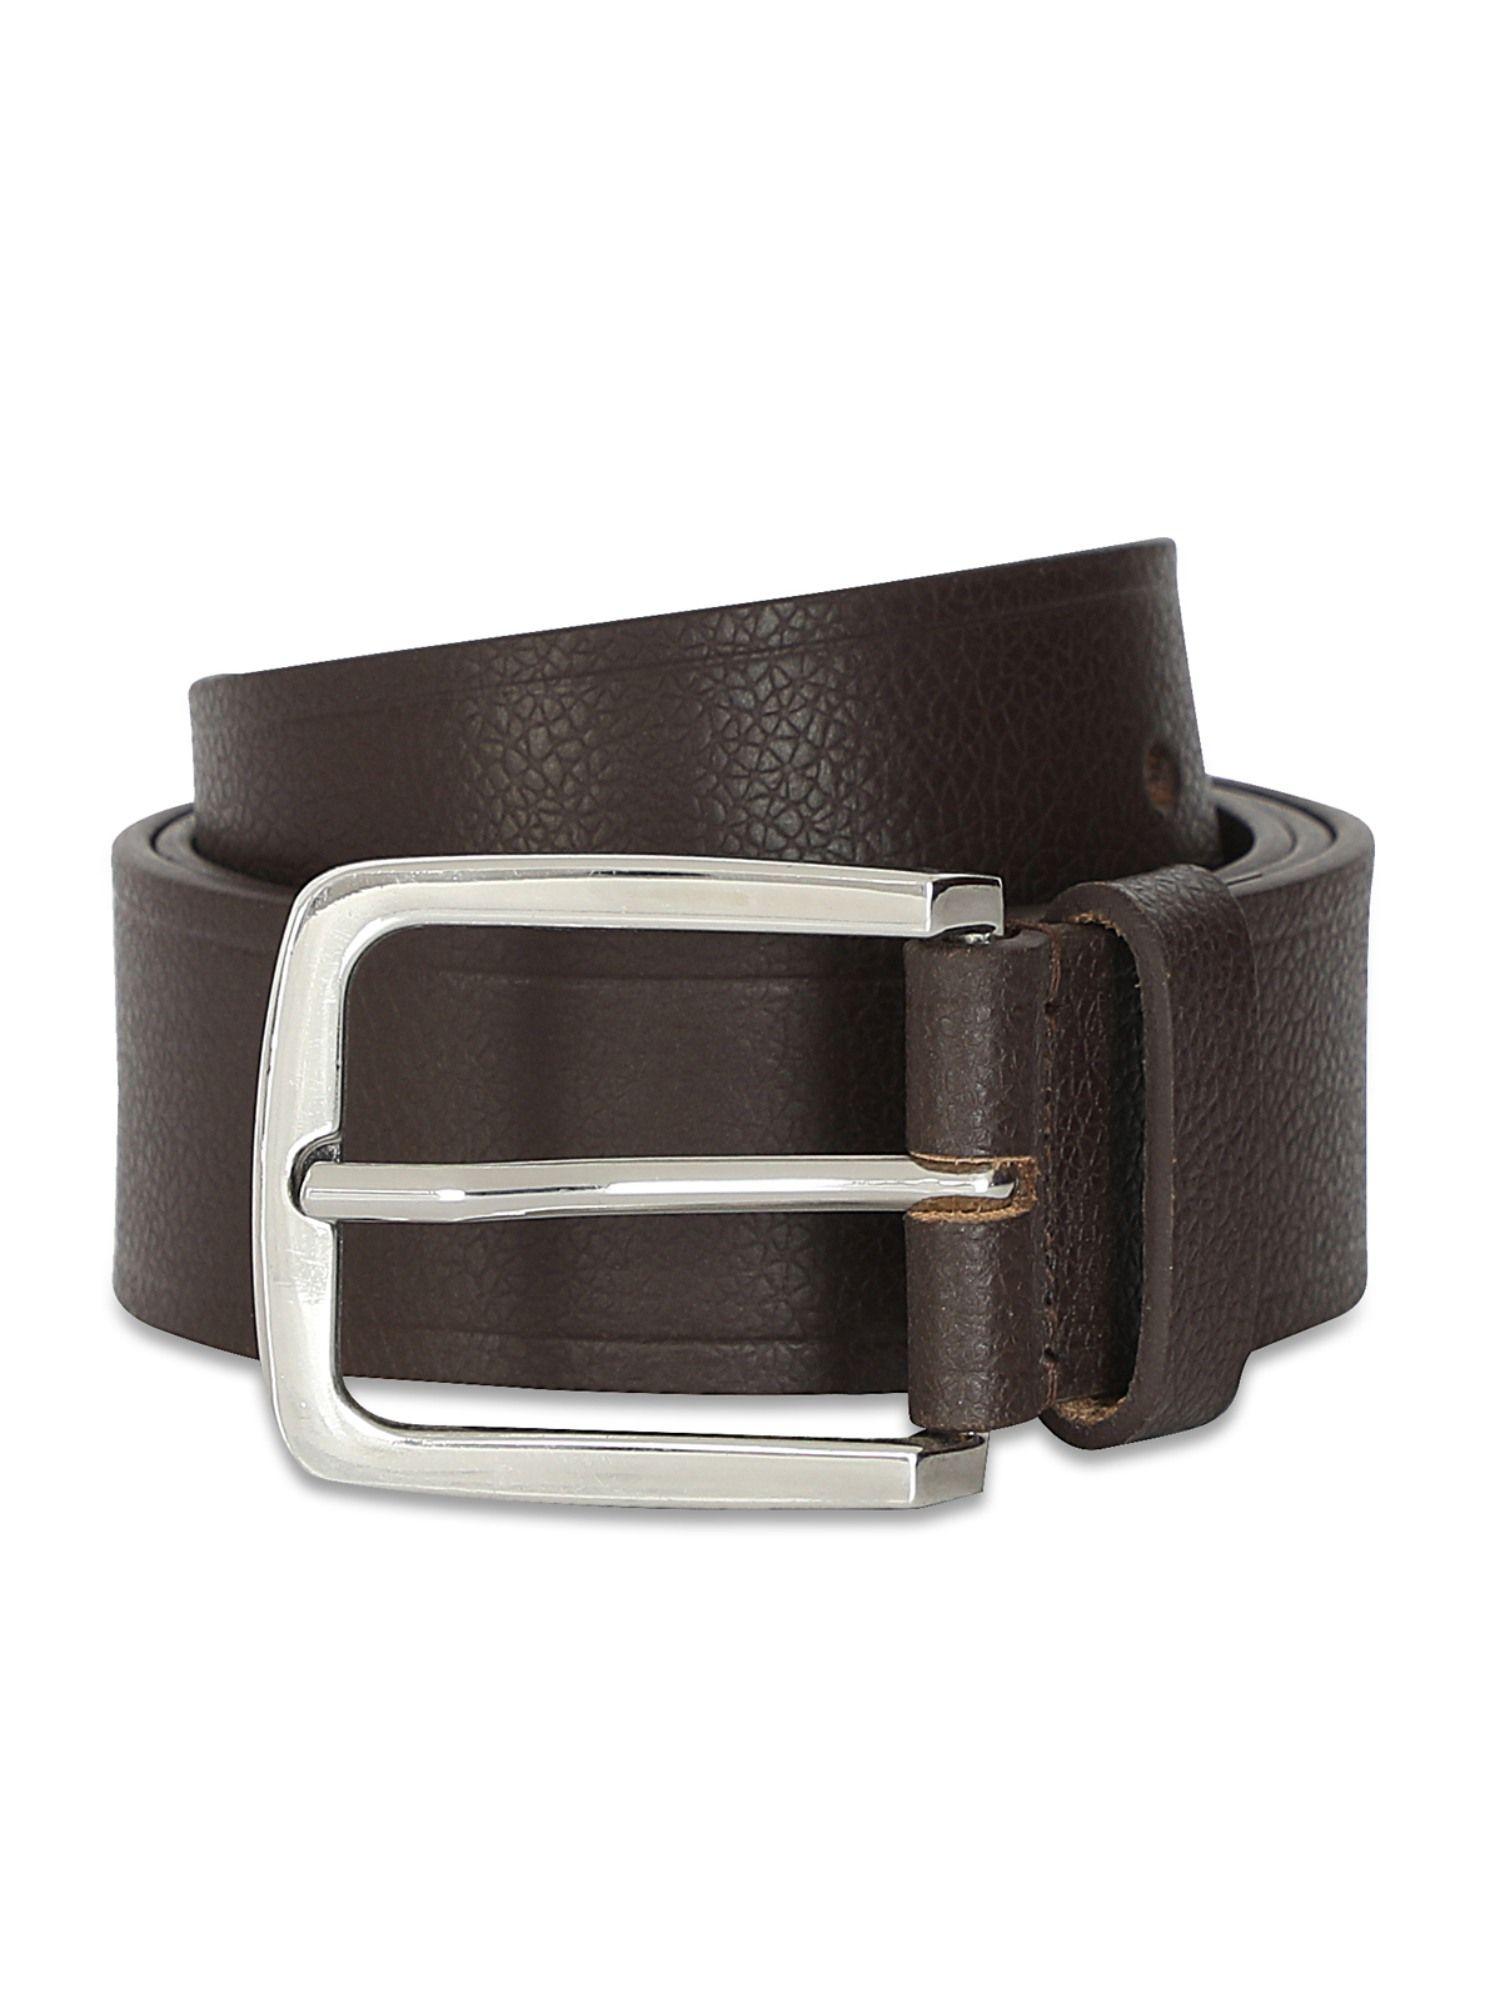 jules mens leather belt textured brown s 8903496179958